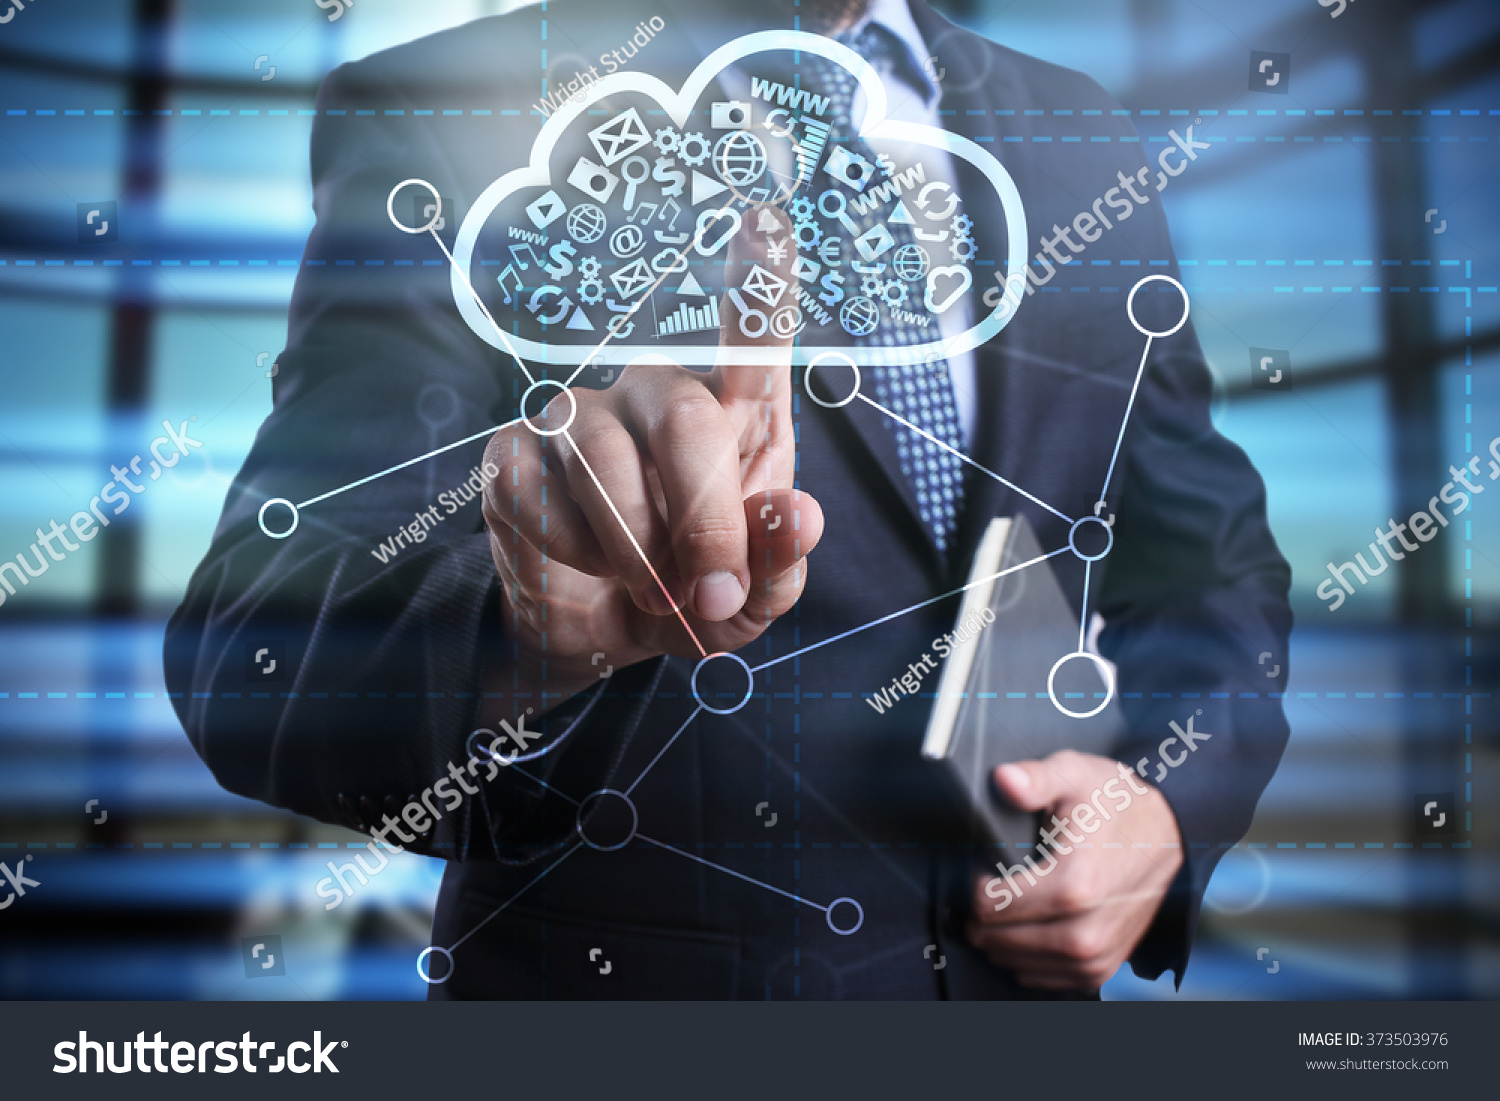 businessman using modern computer, pressing button on virtual screen. cloud technology and networking concept.  #373503976